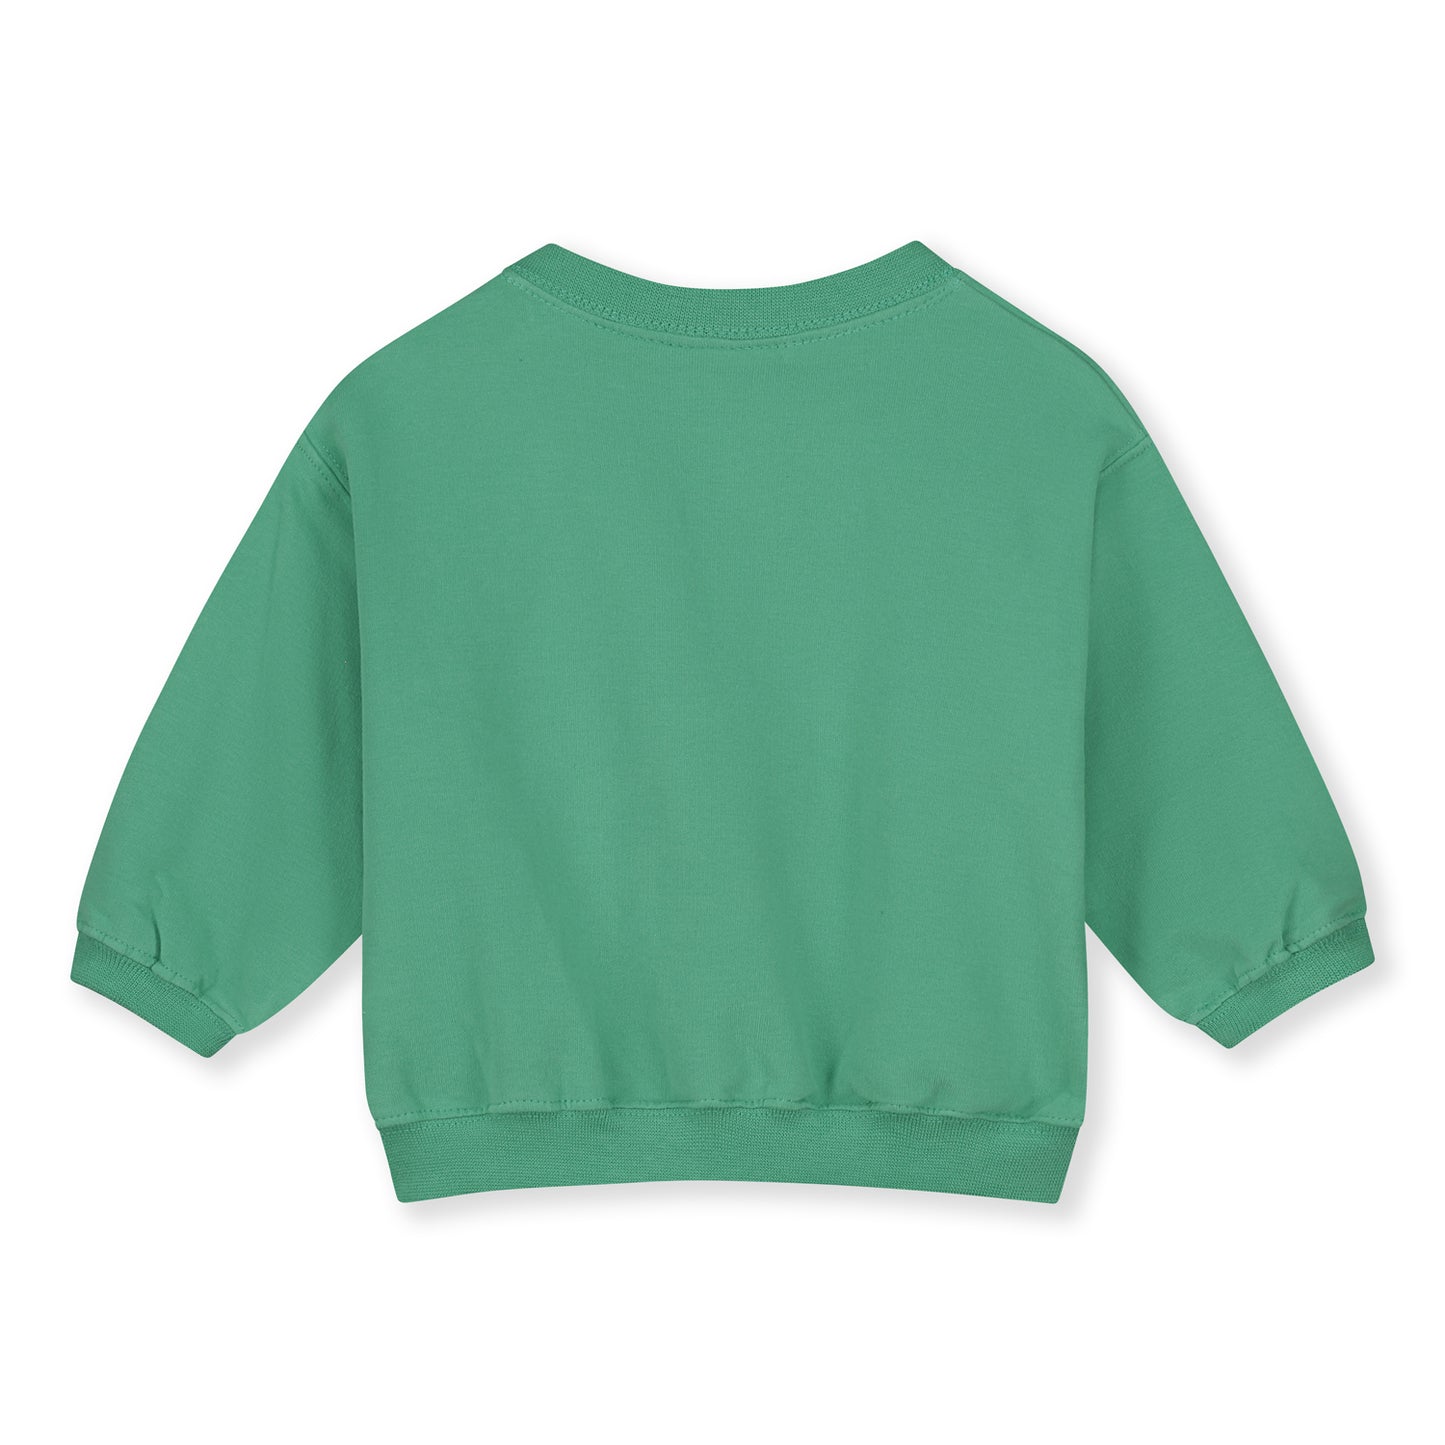 Gray label | Baby Dropped Shoulder
Sweater GOTS |  Bright green